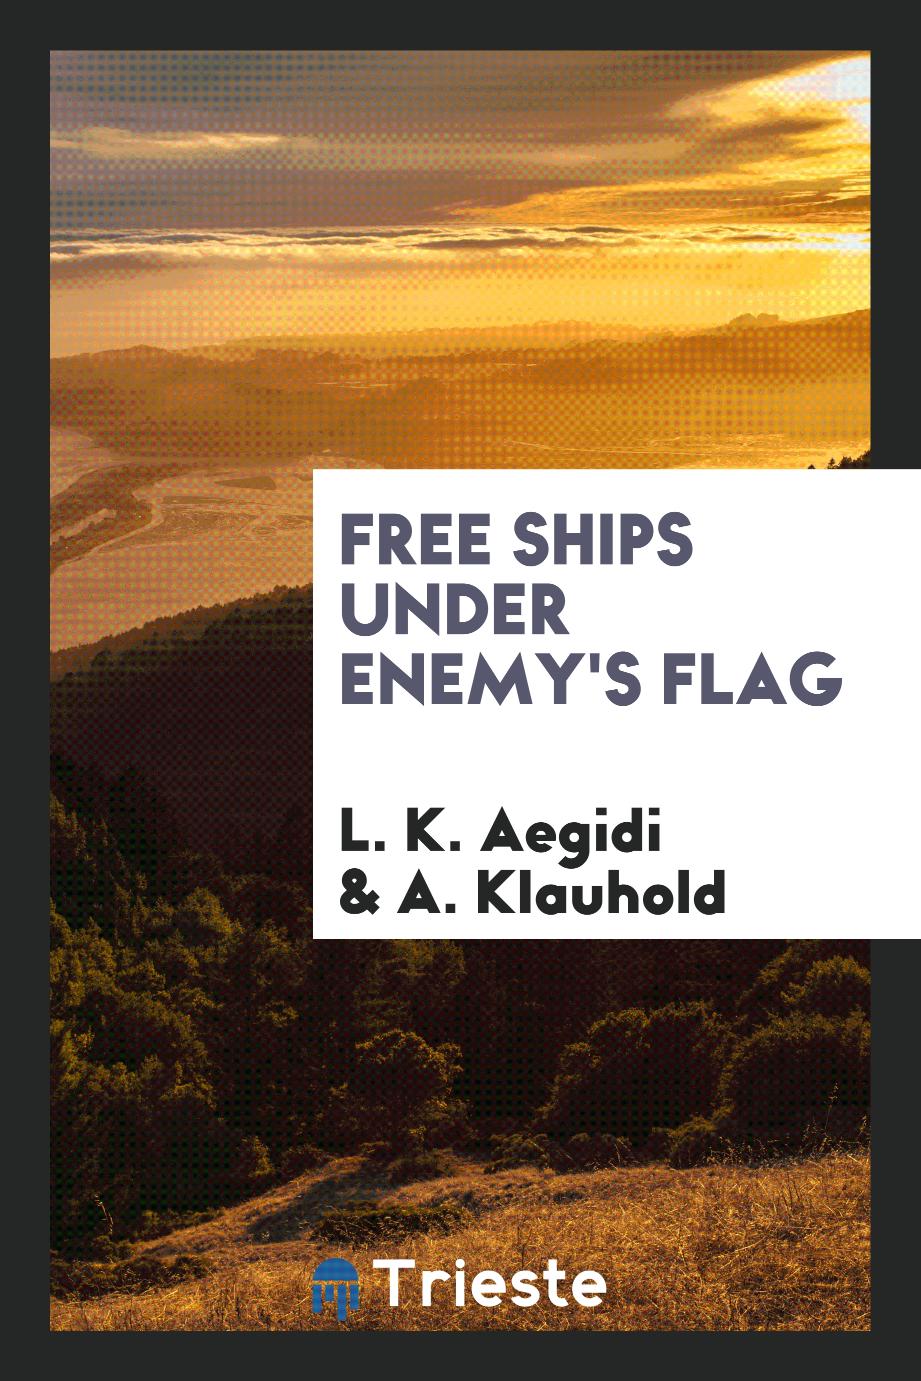 Free ships under enemy's flag